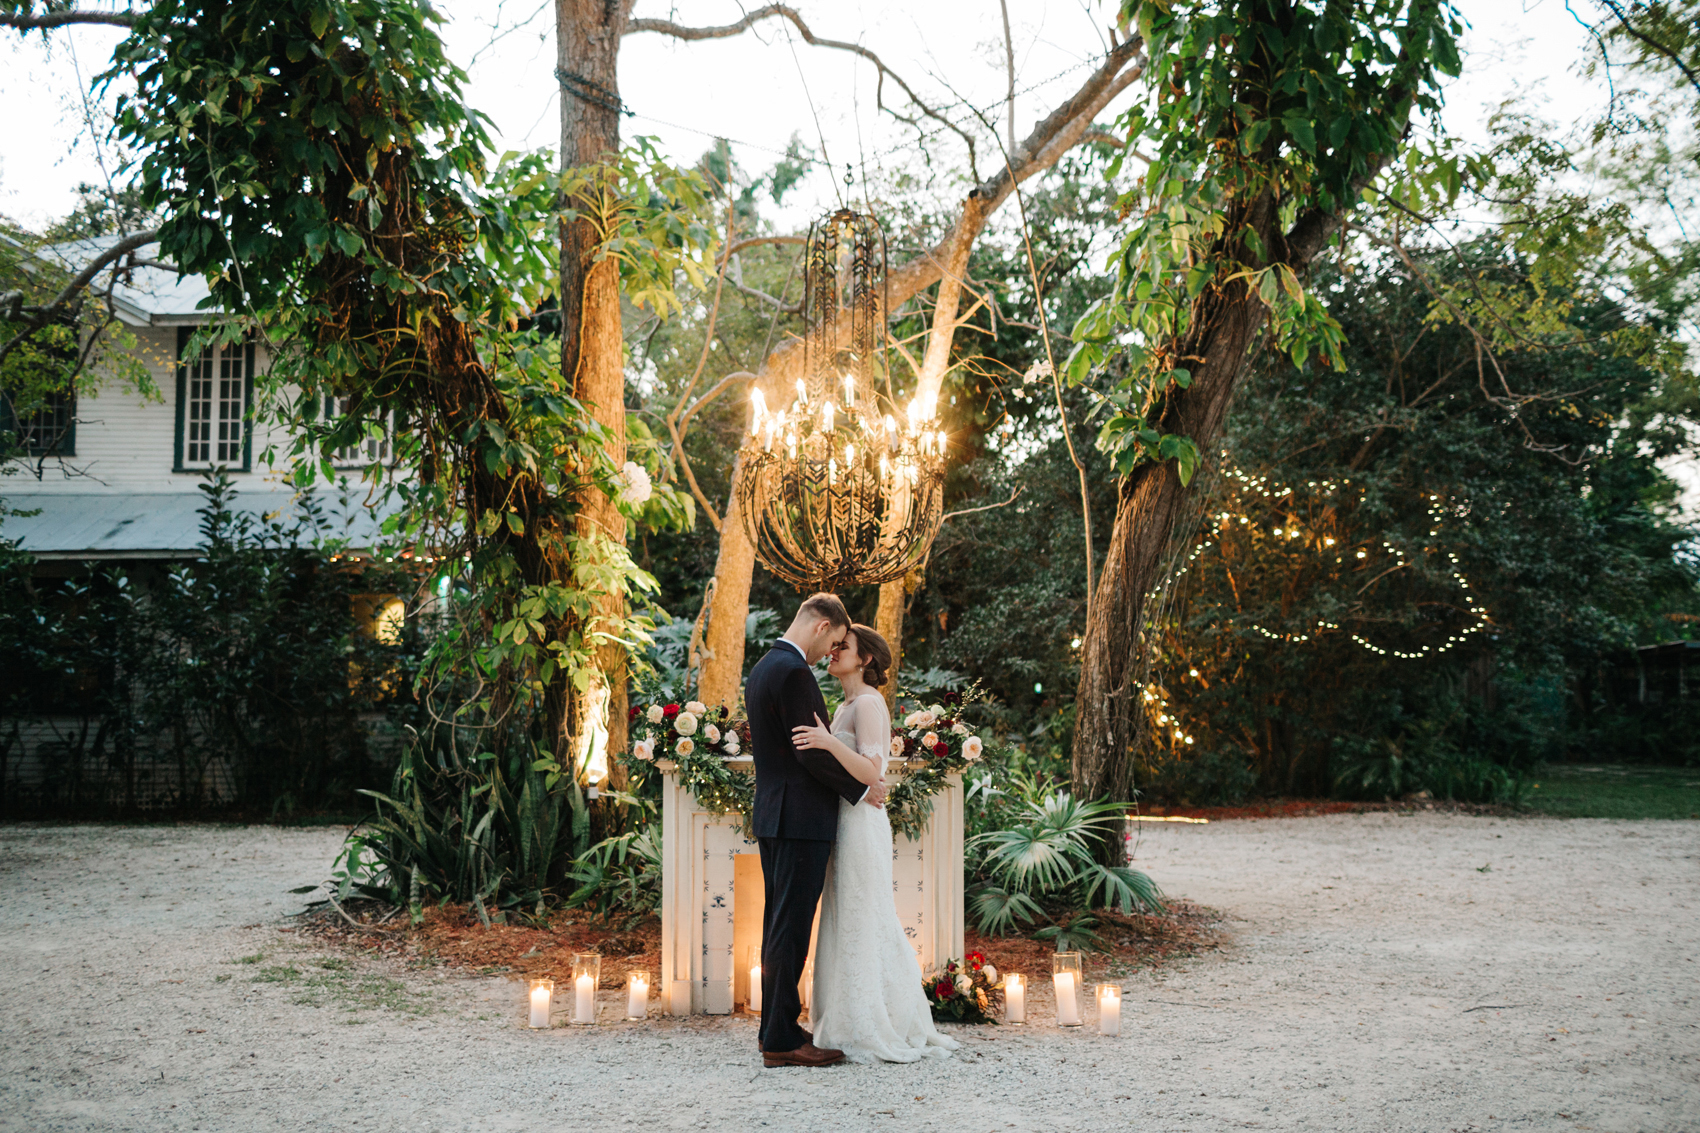 Romantic Orlando wedding photos at dusk with candles and stringlights in front of a vintage fireplace in the garden wedding